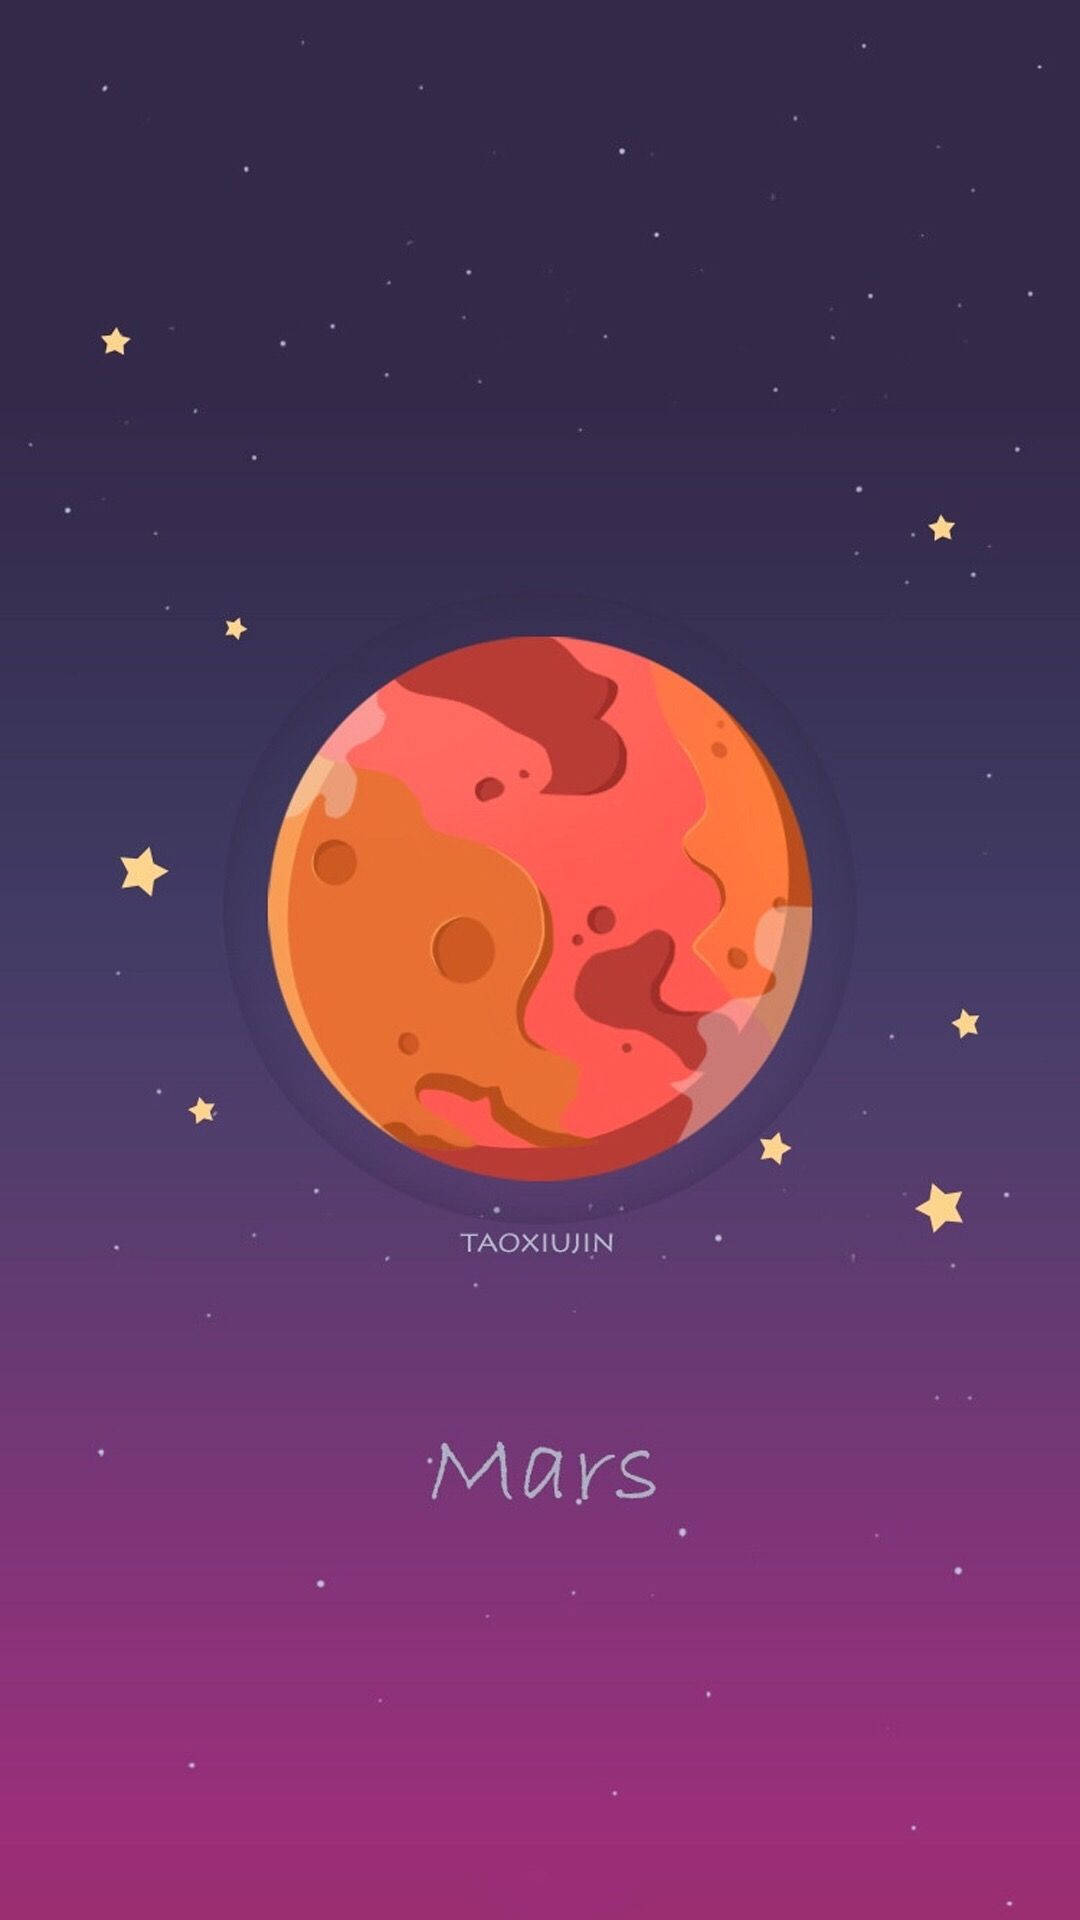 Mars Planet In The Sky With Stars Wallpaper